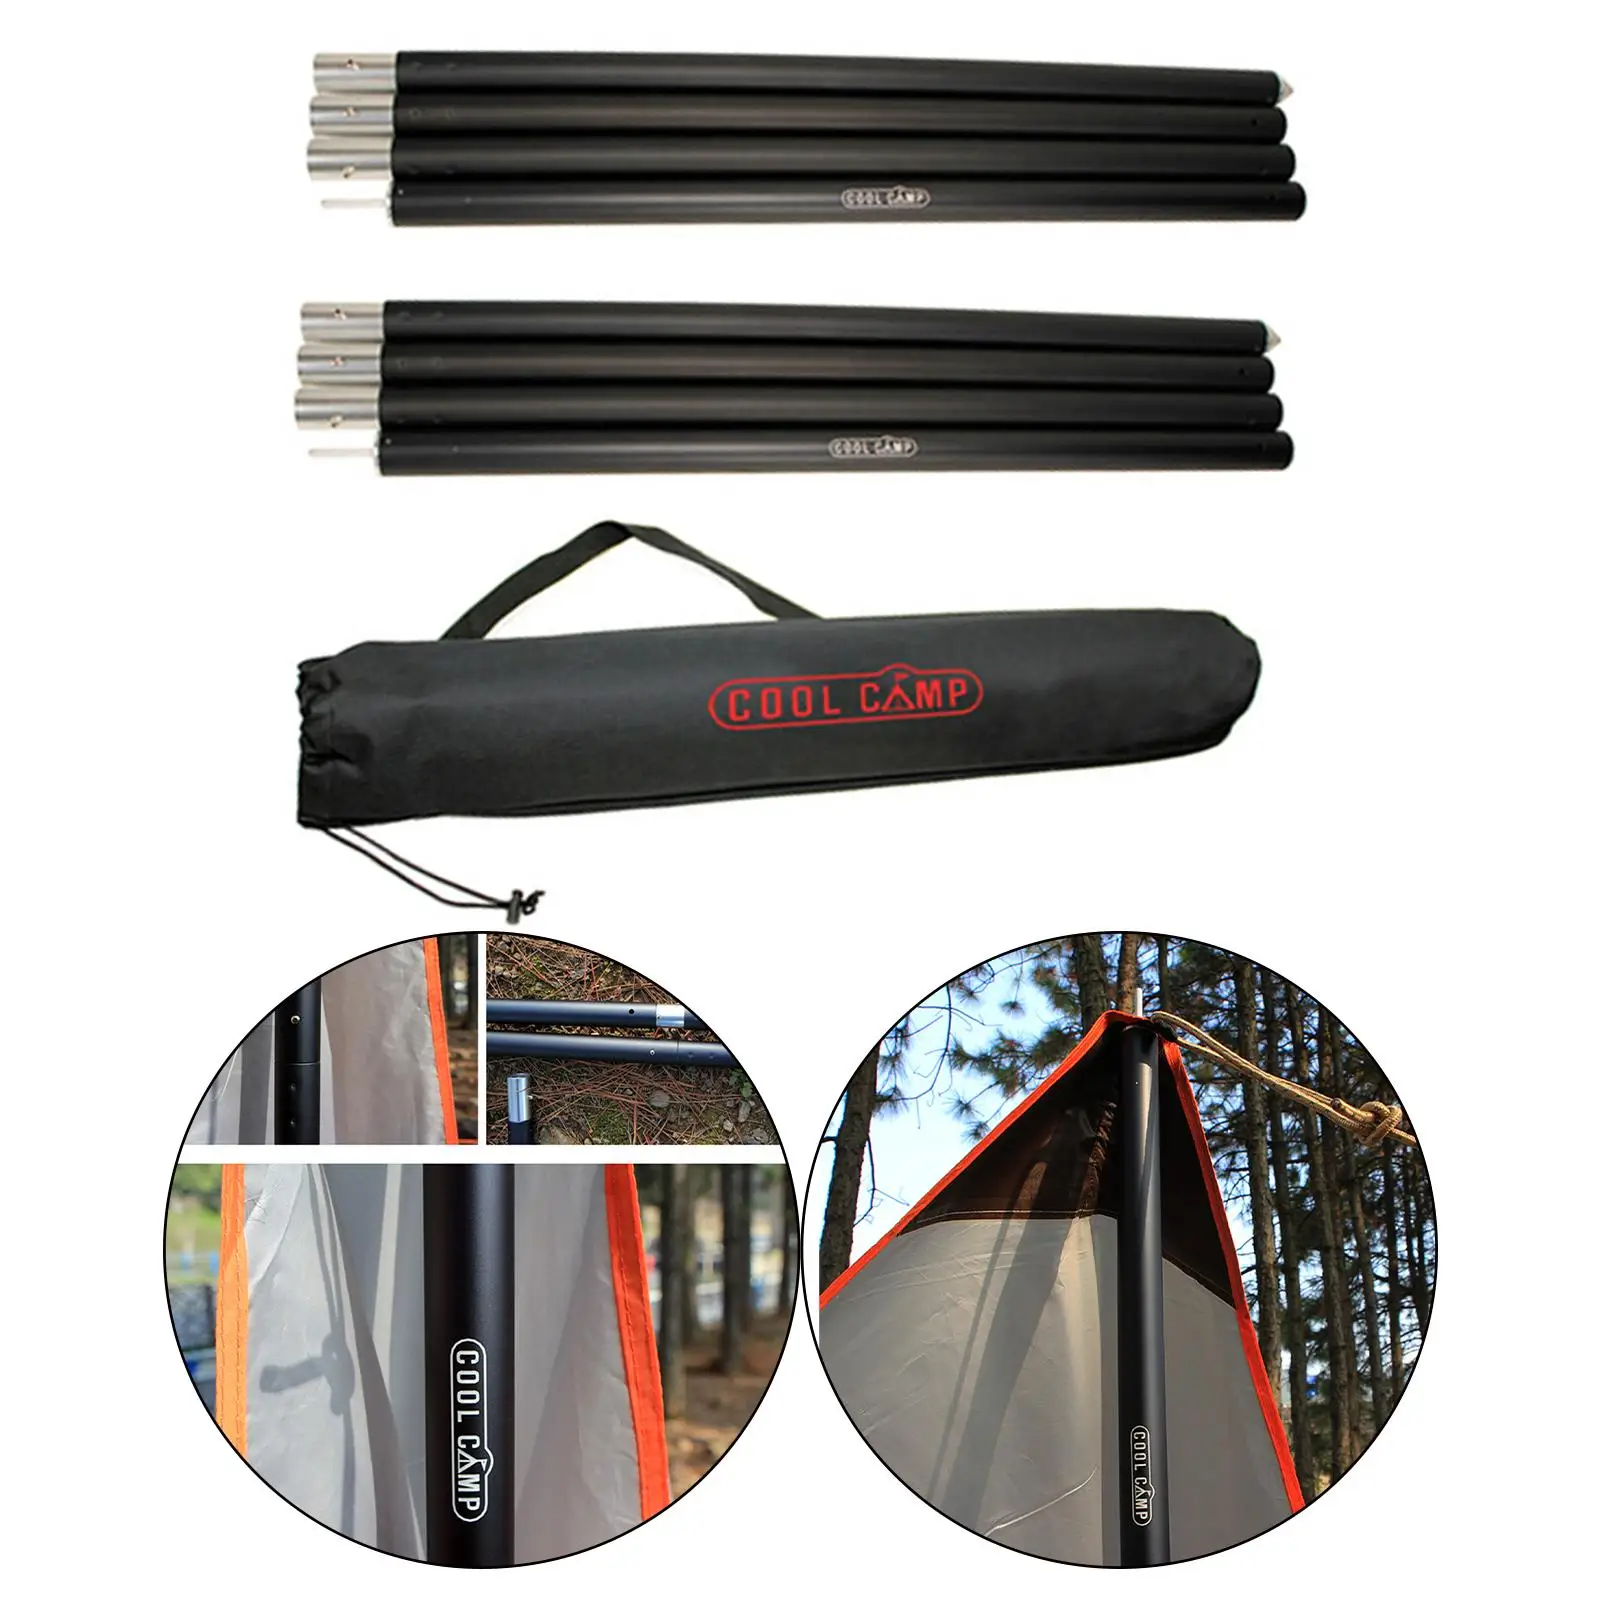 33mm Aluminum Tarp Poles Adjustable for Camping, Awnings,Shelters ,Made of High Strength Aluminum Alloy